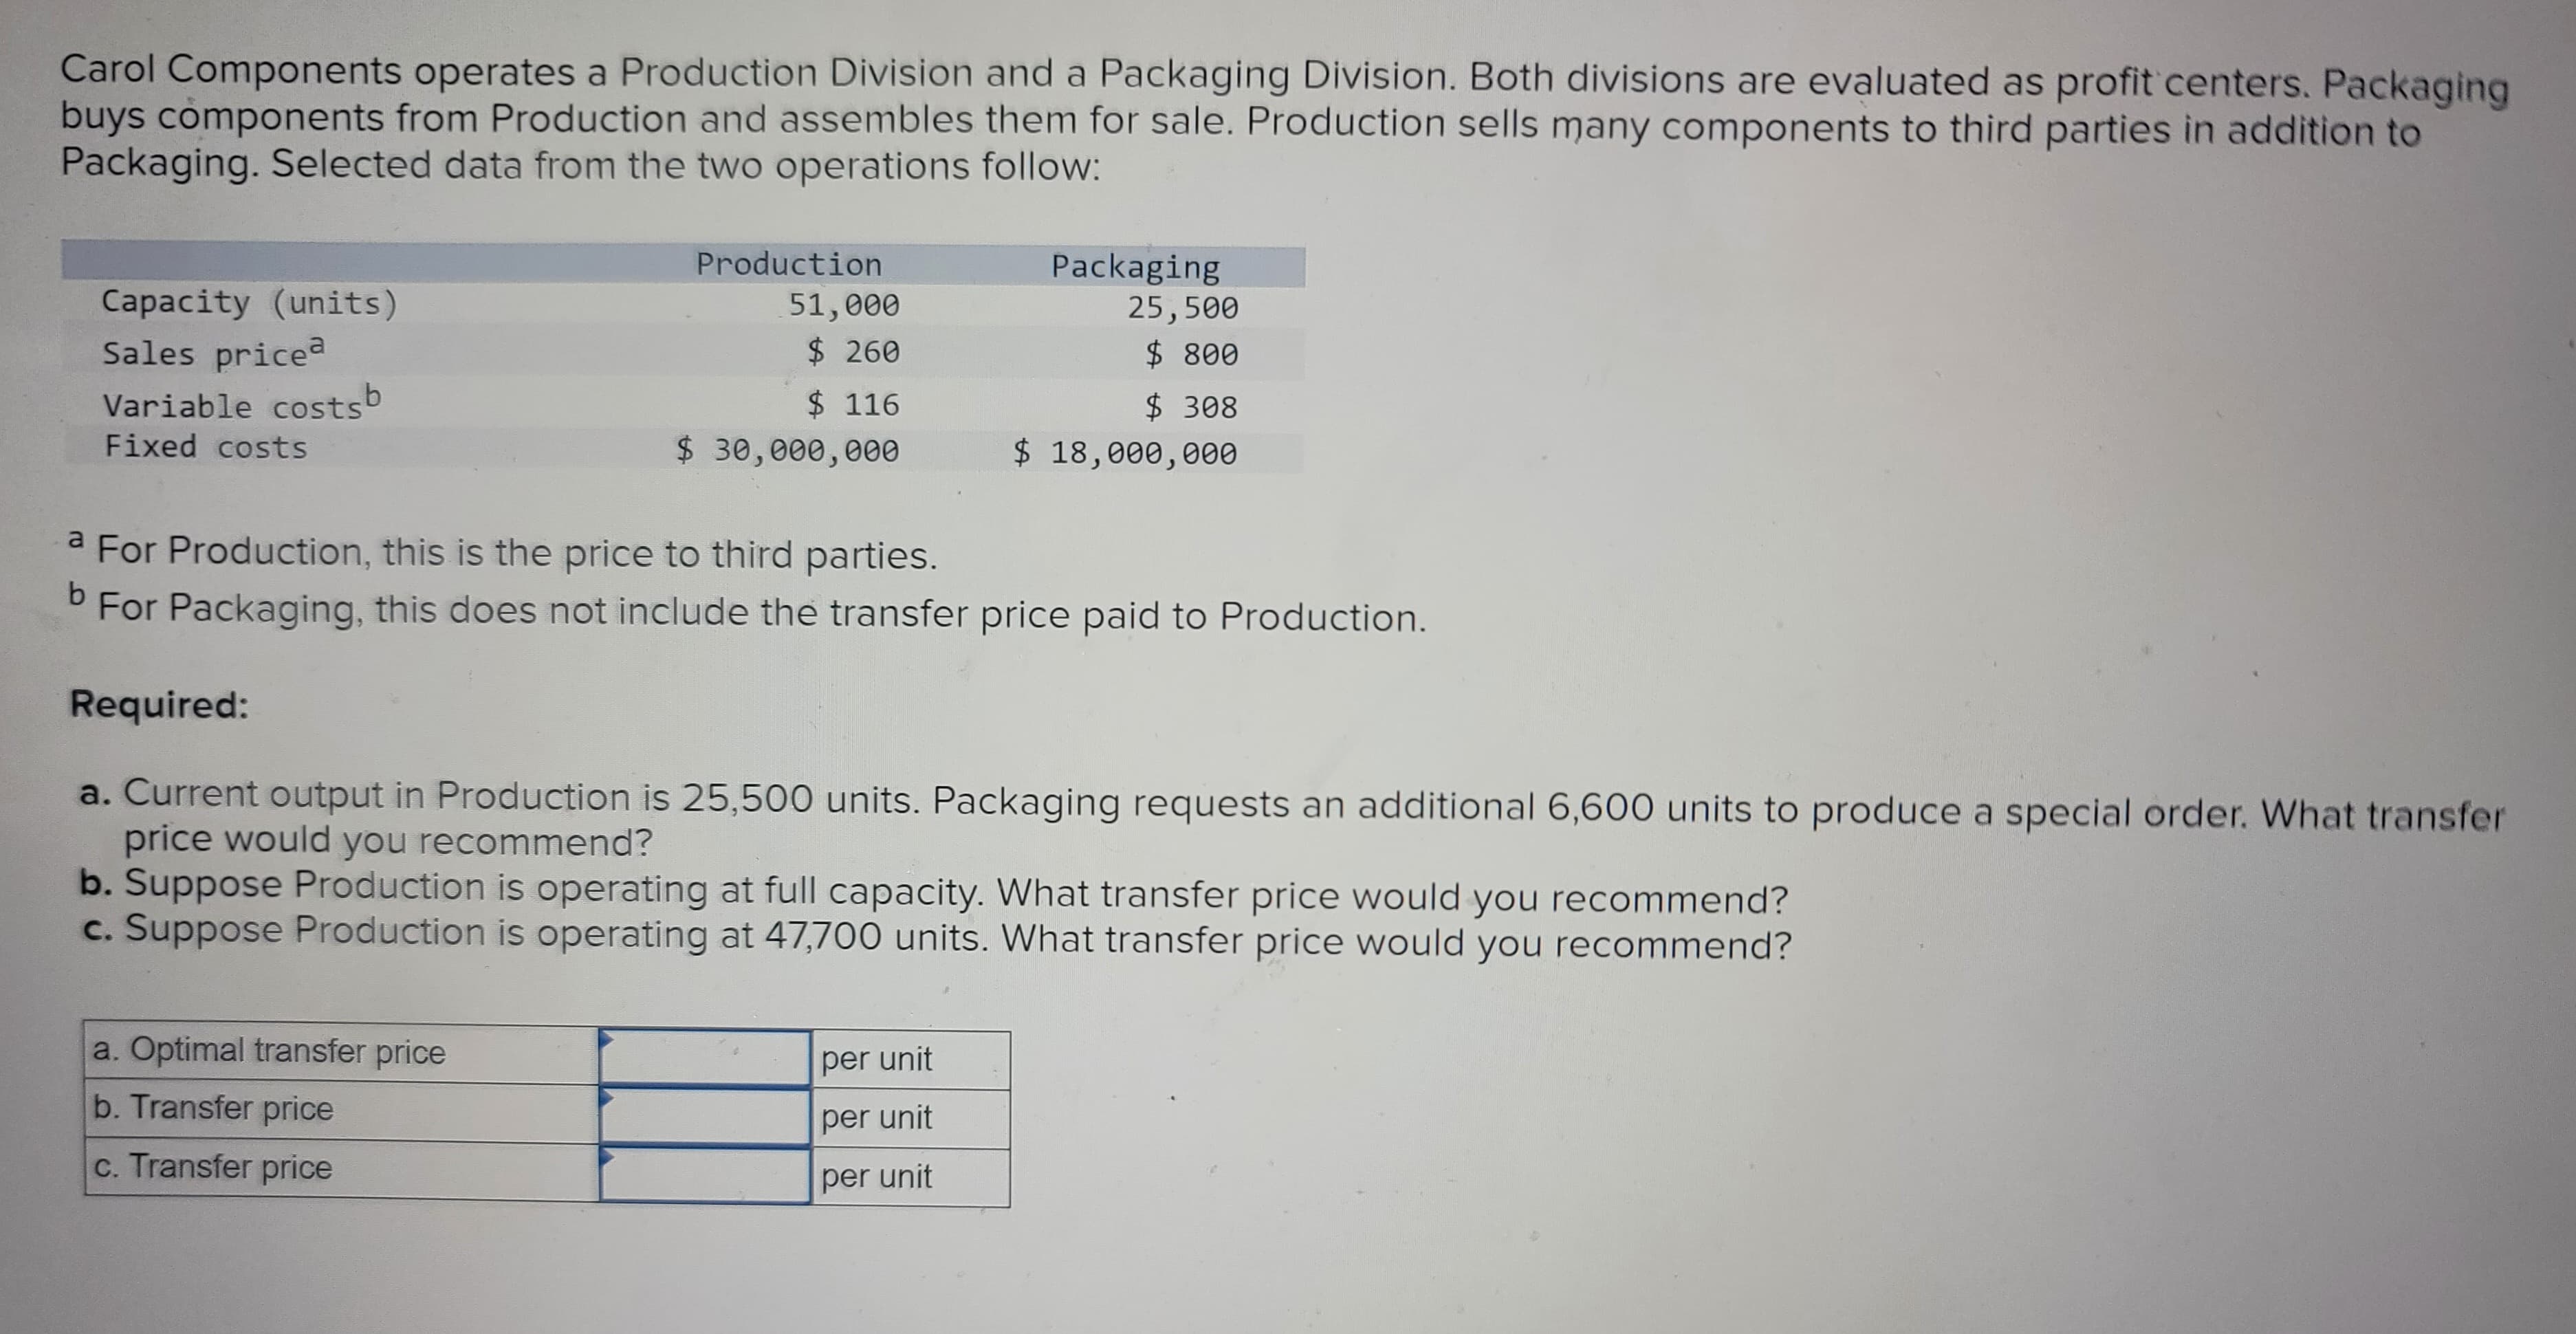 Carol Components operates a Production Division and a Packaging Division. Both divisions are evaluated as profit centers. Packaging
buys components from Production and assembles them for sale. Production sells many components to third parties in addition to
Packaging. Selected data from the two operations follow:
Capacity (units)
Sales pricea
Variable costs b
Fixed costs
Production
51,000
$ 260
$116
$ 30,000,000
a For Production, this is the price to third parties.
b
For Packaging, this does not include the transfer price paid to Production.
a. Optimal transfer price
b. Transfer price
c. Transfer price
Packaging
25,500
$ 800
$ 308
$ 18,000,000
Required:
a. Current output in Production is 25,500 units. Packaging requests an additional 6,600 units to produce a special order. What transfer
price would you recommend?
b. Suppose Production is operating at full capacity. What transfer price would you recommend?
c. Suppose Production is operating at 47,700 units. What transfer price would you recommend?
per unit
per unit
per unit